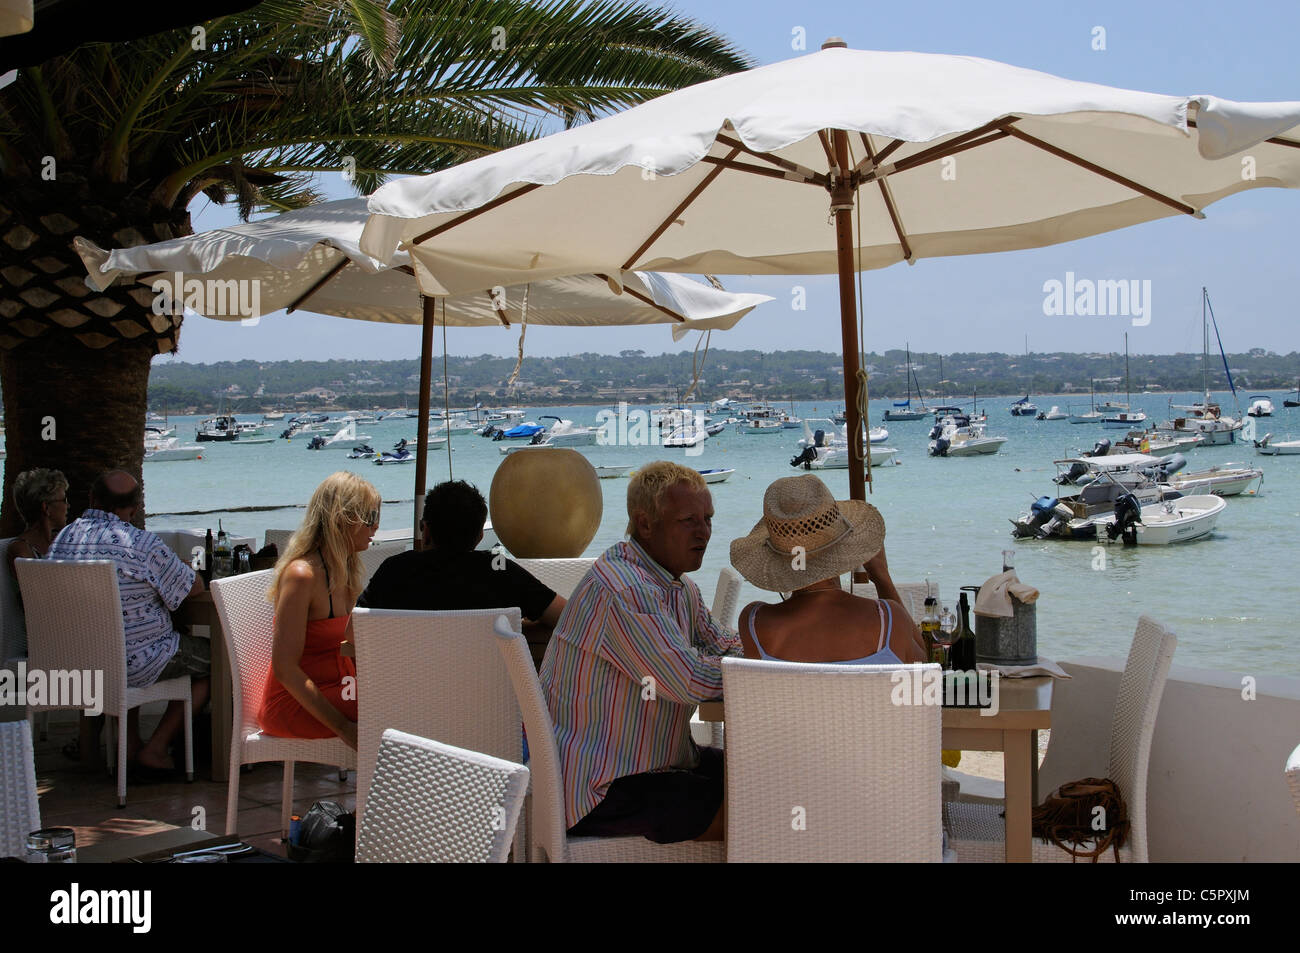 Customers dining in a waterfront restaurant on the Spanish island of Formentera Stock Photo